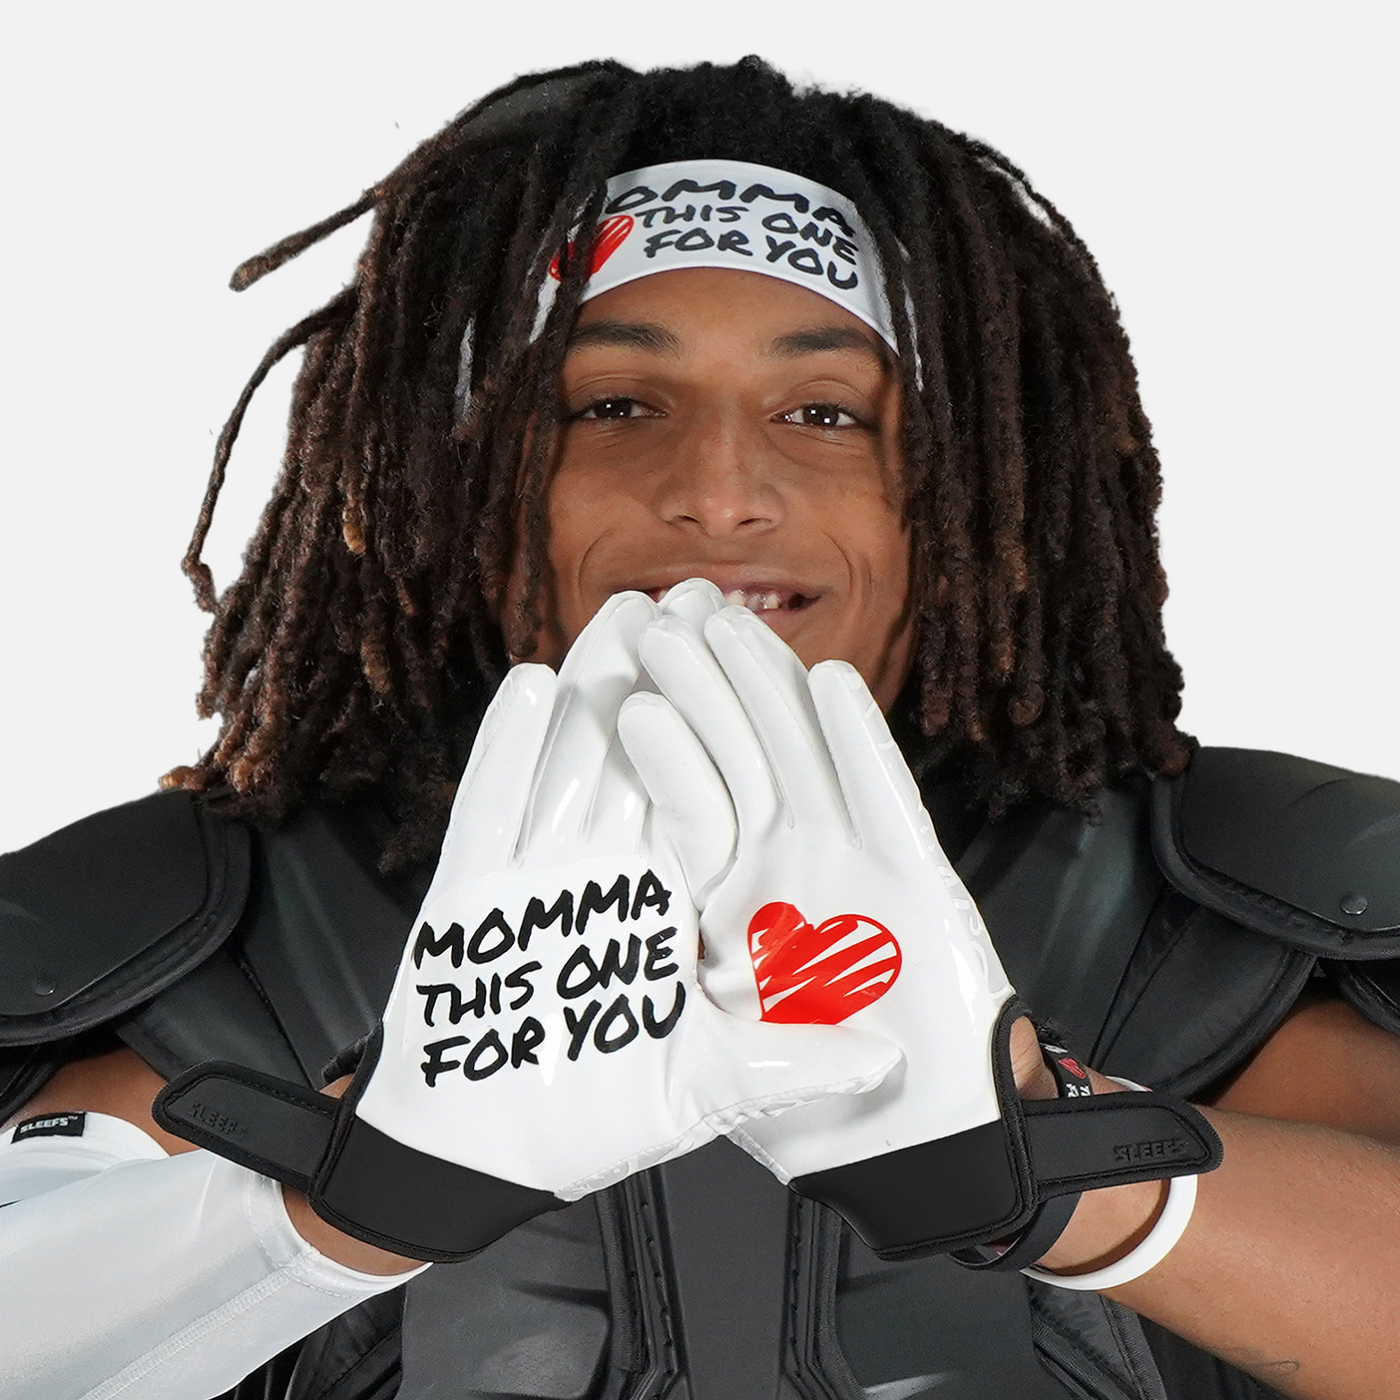 Momma Sticky Football Receiver Gloves